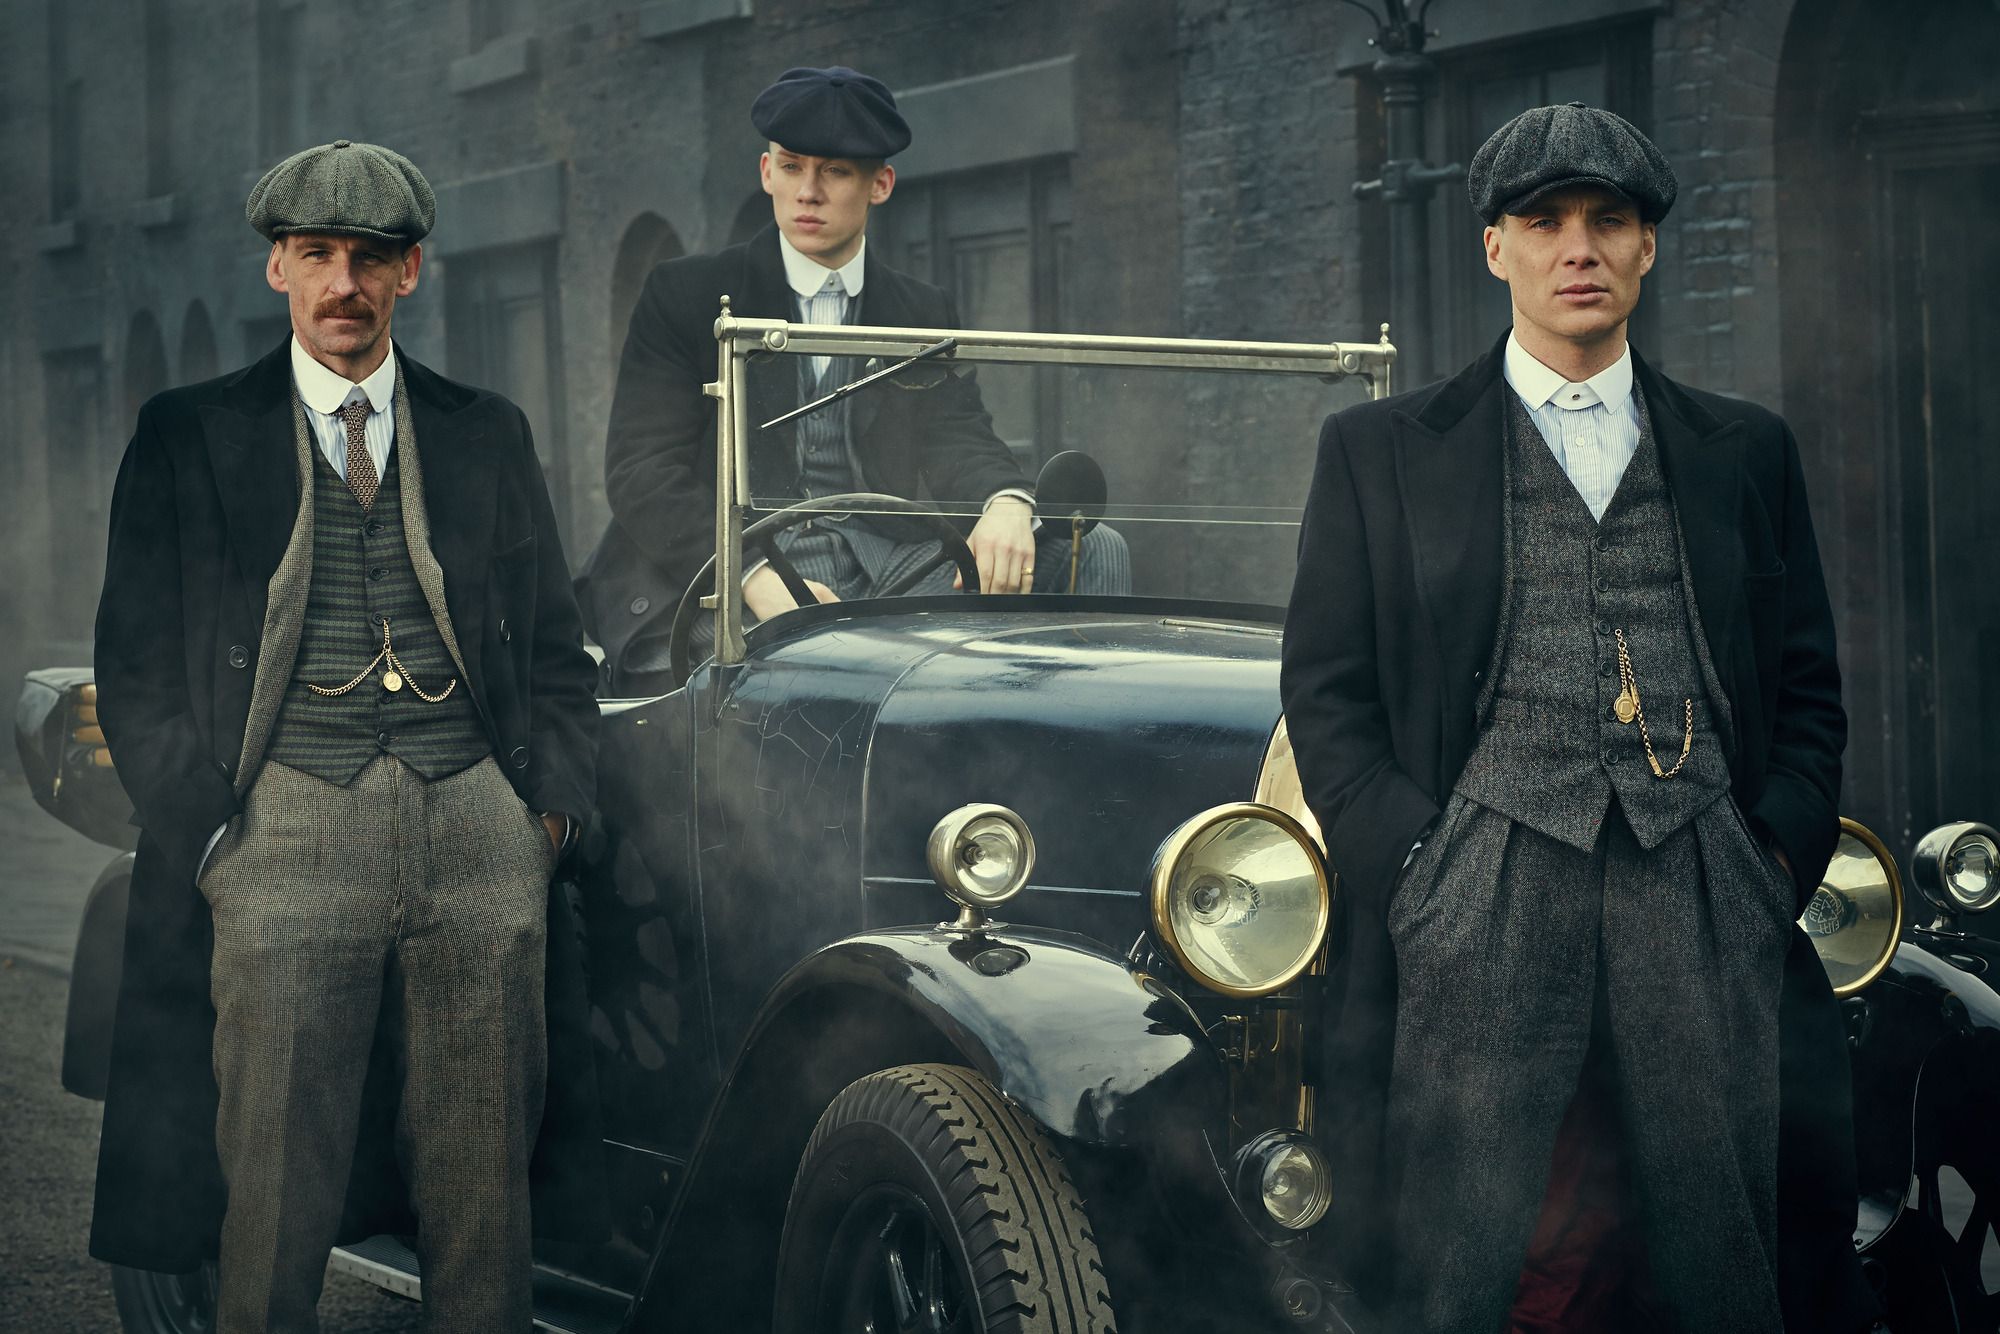 7 Life Lessons from the Gritty World of Peaky Blinders